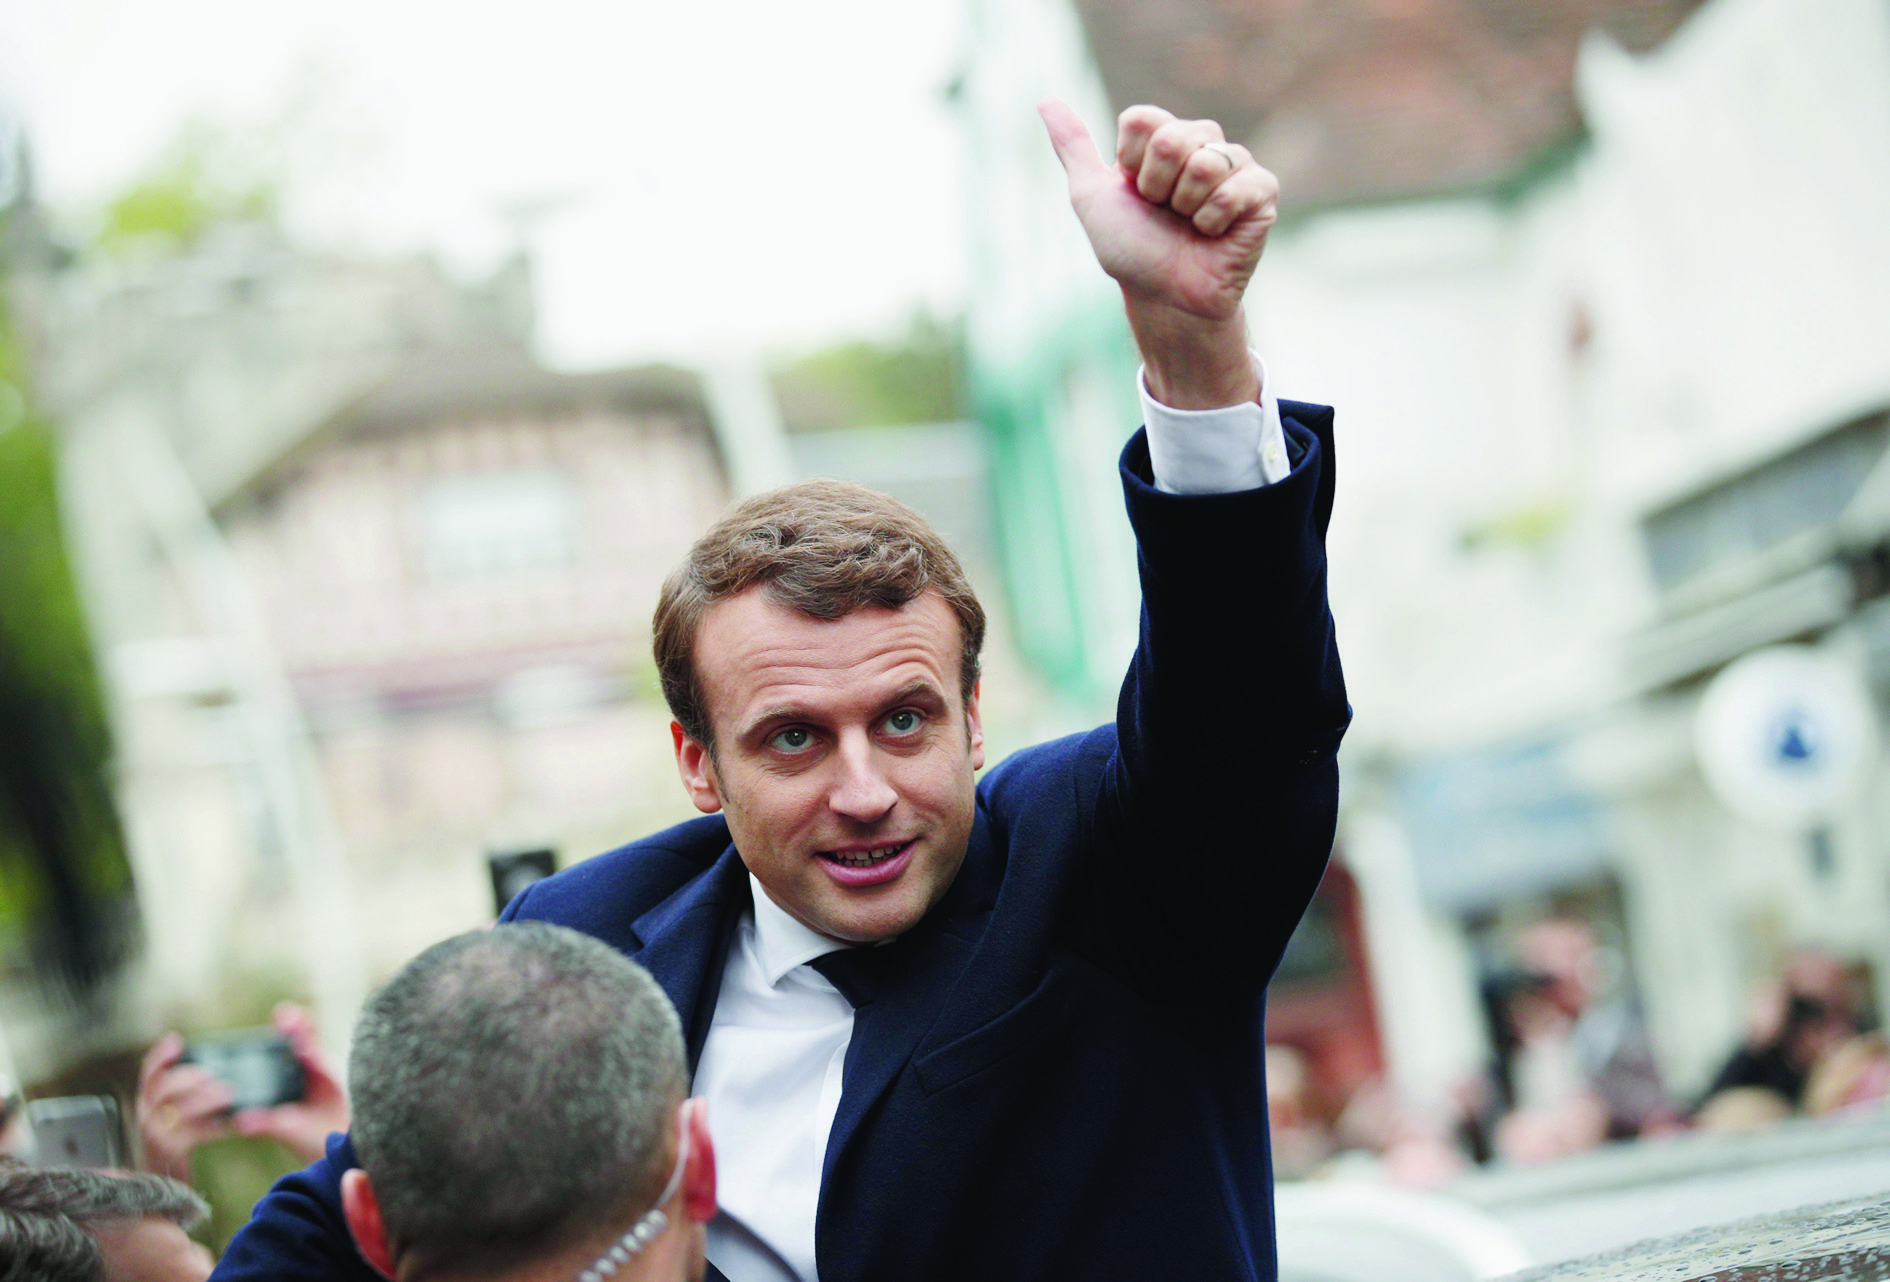 epa05948026 epa05947979 French presidential election candidate for the 'En Marche!' (Onwards!) political movement, Emmanuel Macron (C), waves as he leaves after voting in the second round of the French presidential elections in Le Touquet-Paris-Plage, northern France, 07 May 2017.  EPA/YOAN VALAT  EPA/YOAN VALAT FRANCE PRESIDENTIAL ELECTIONS